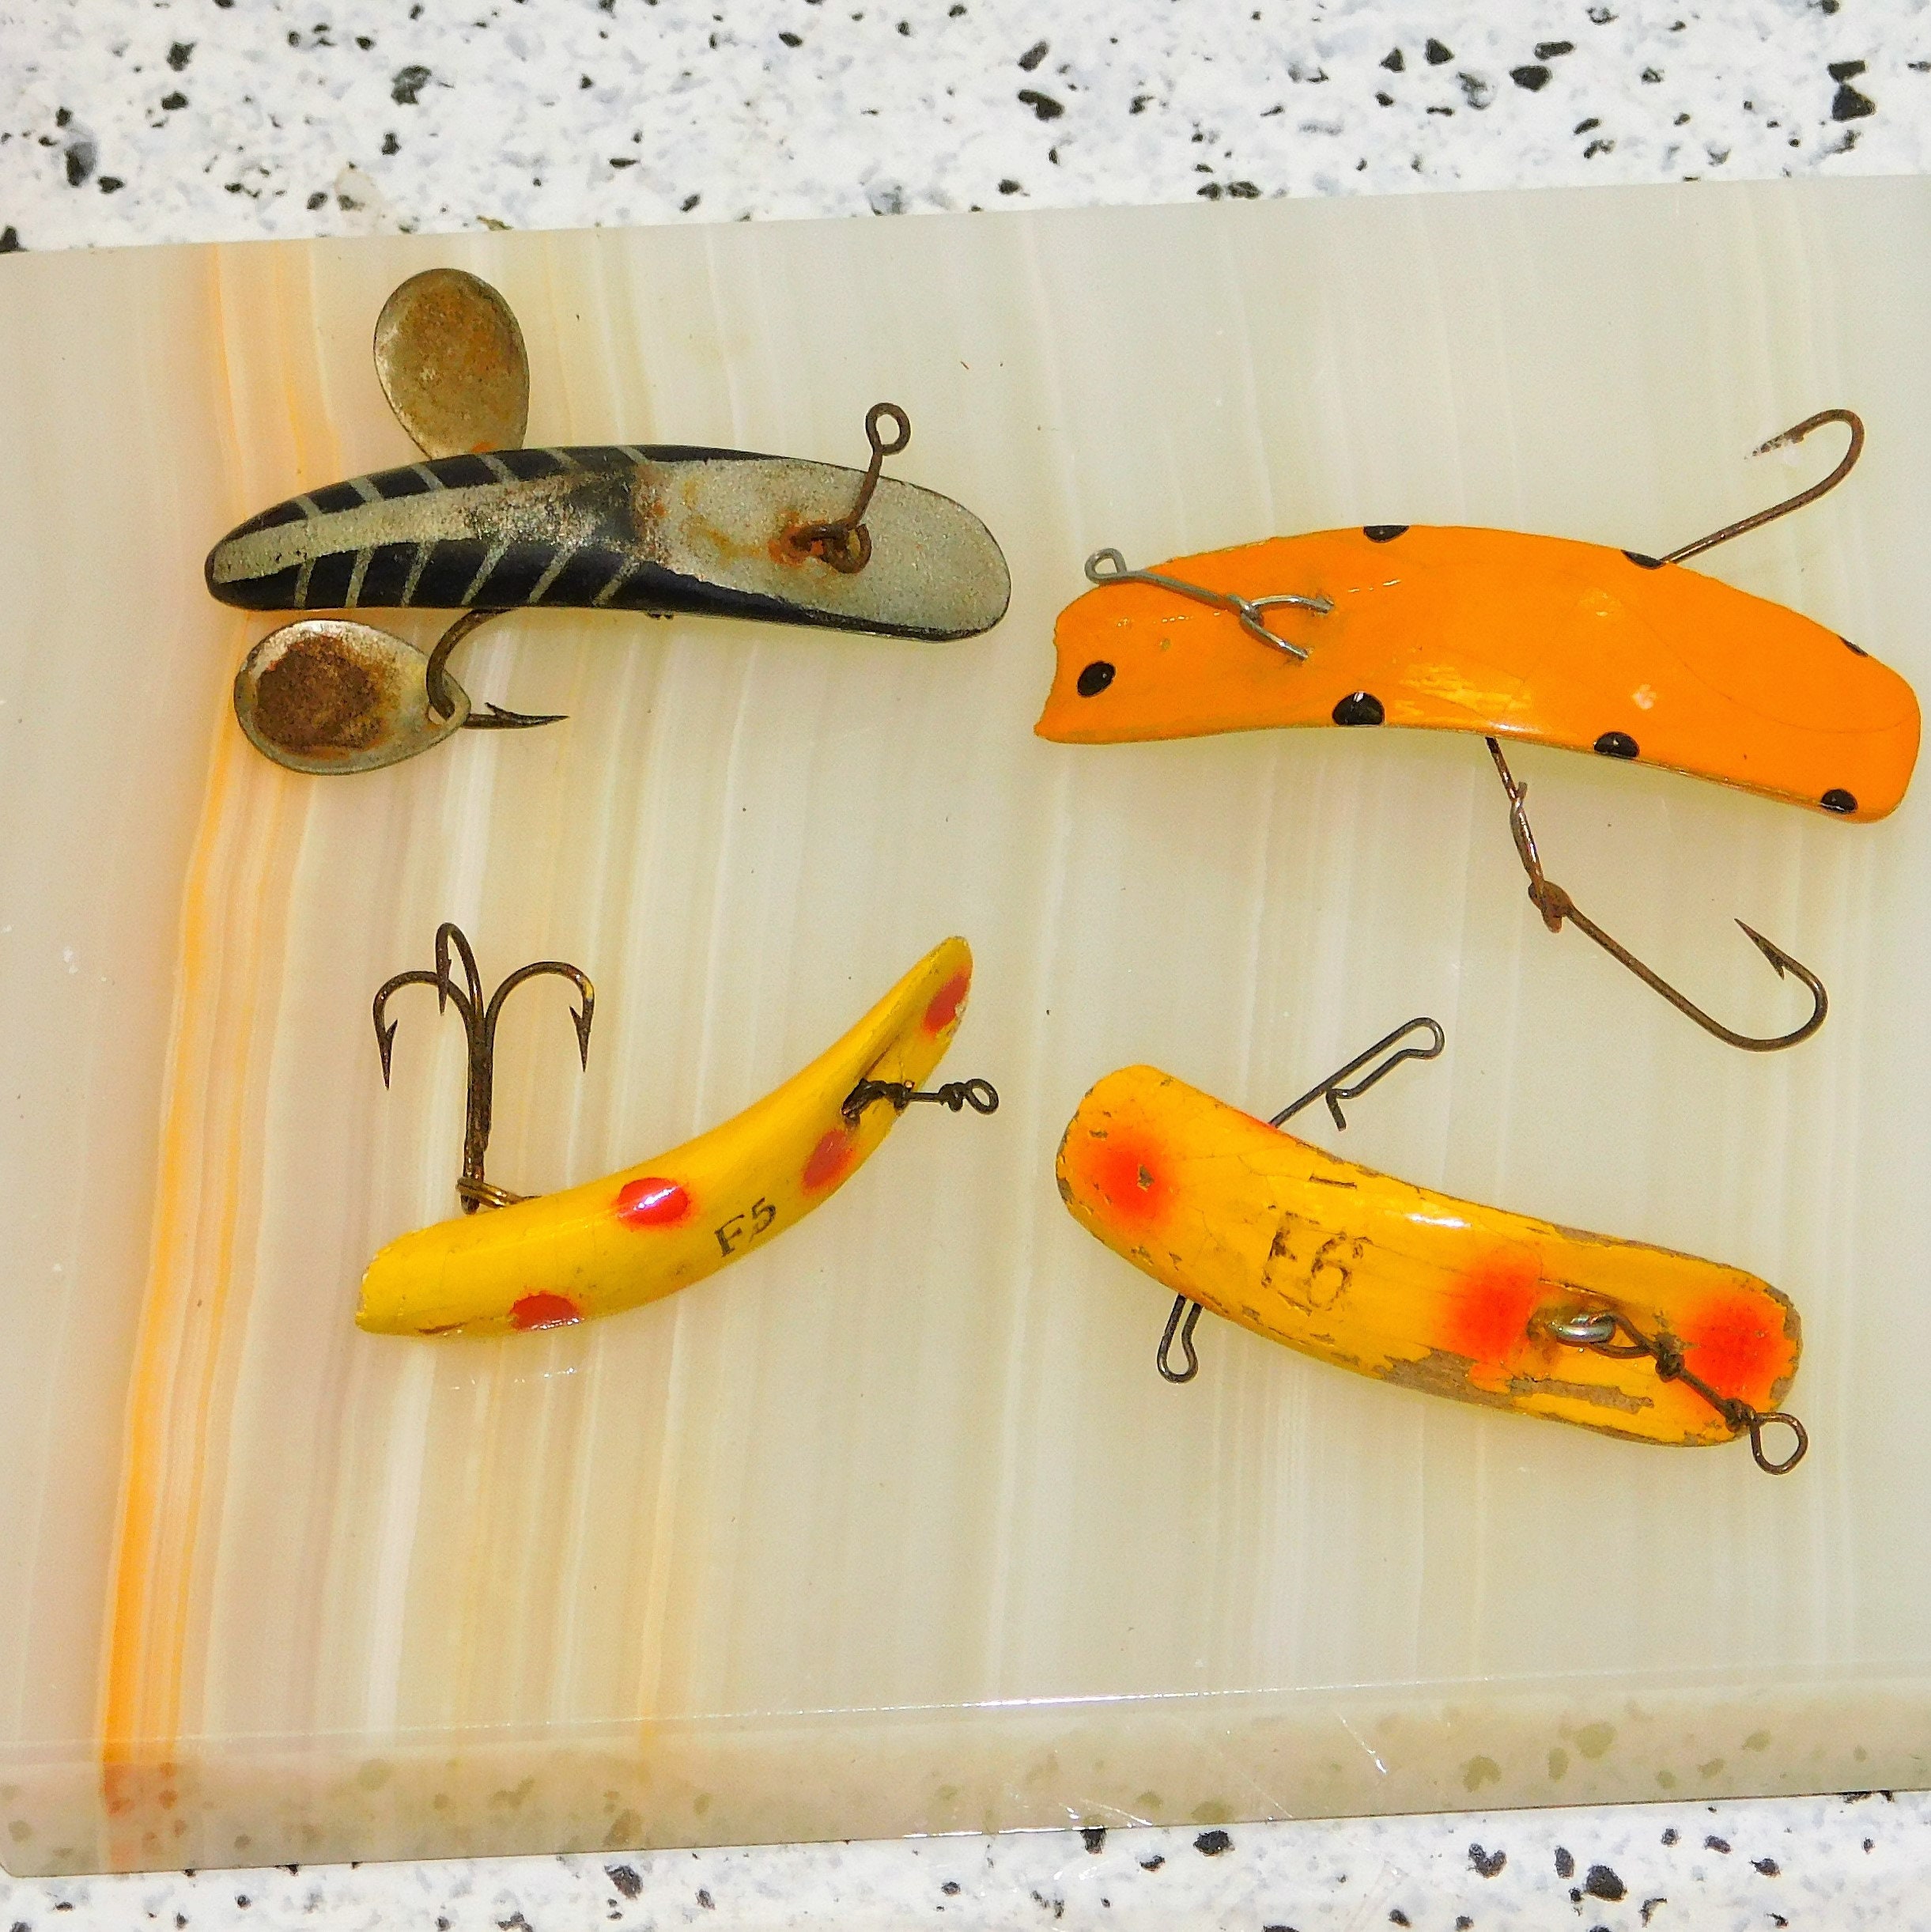 Vintage Fishing Lure Lot of 2bait and Tackle Blakemore Marabou